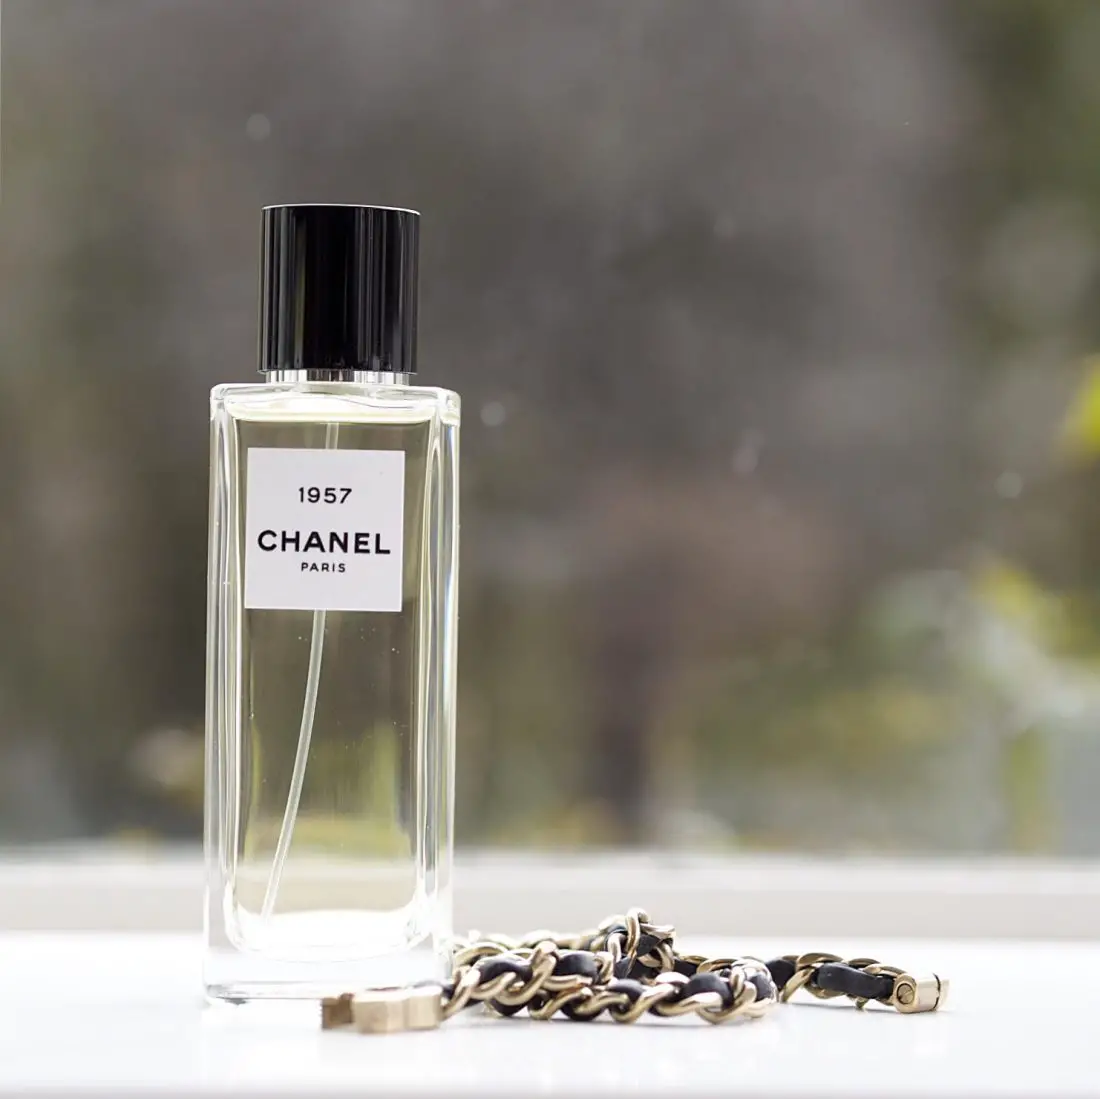 Smelly News: Les Exclusifs de Chanel to Launch Misia – The Candy Perfume Boy